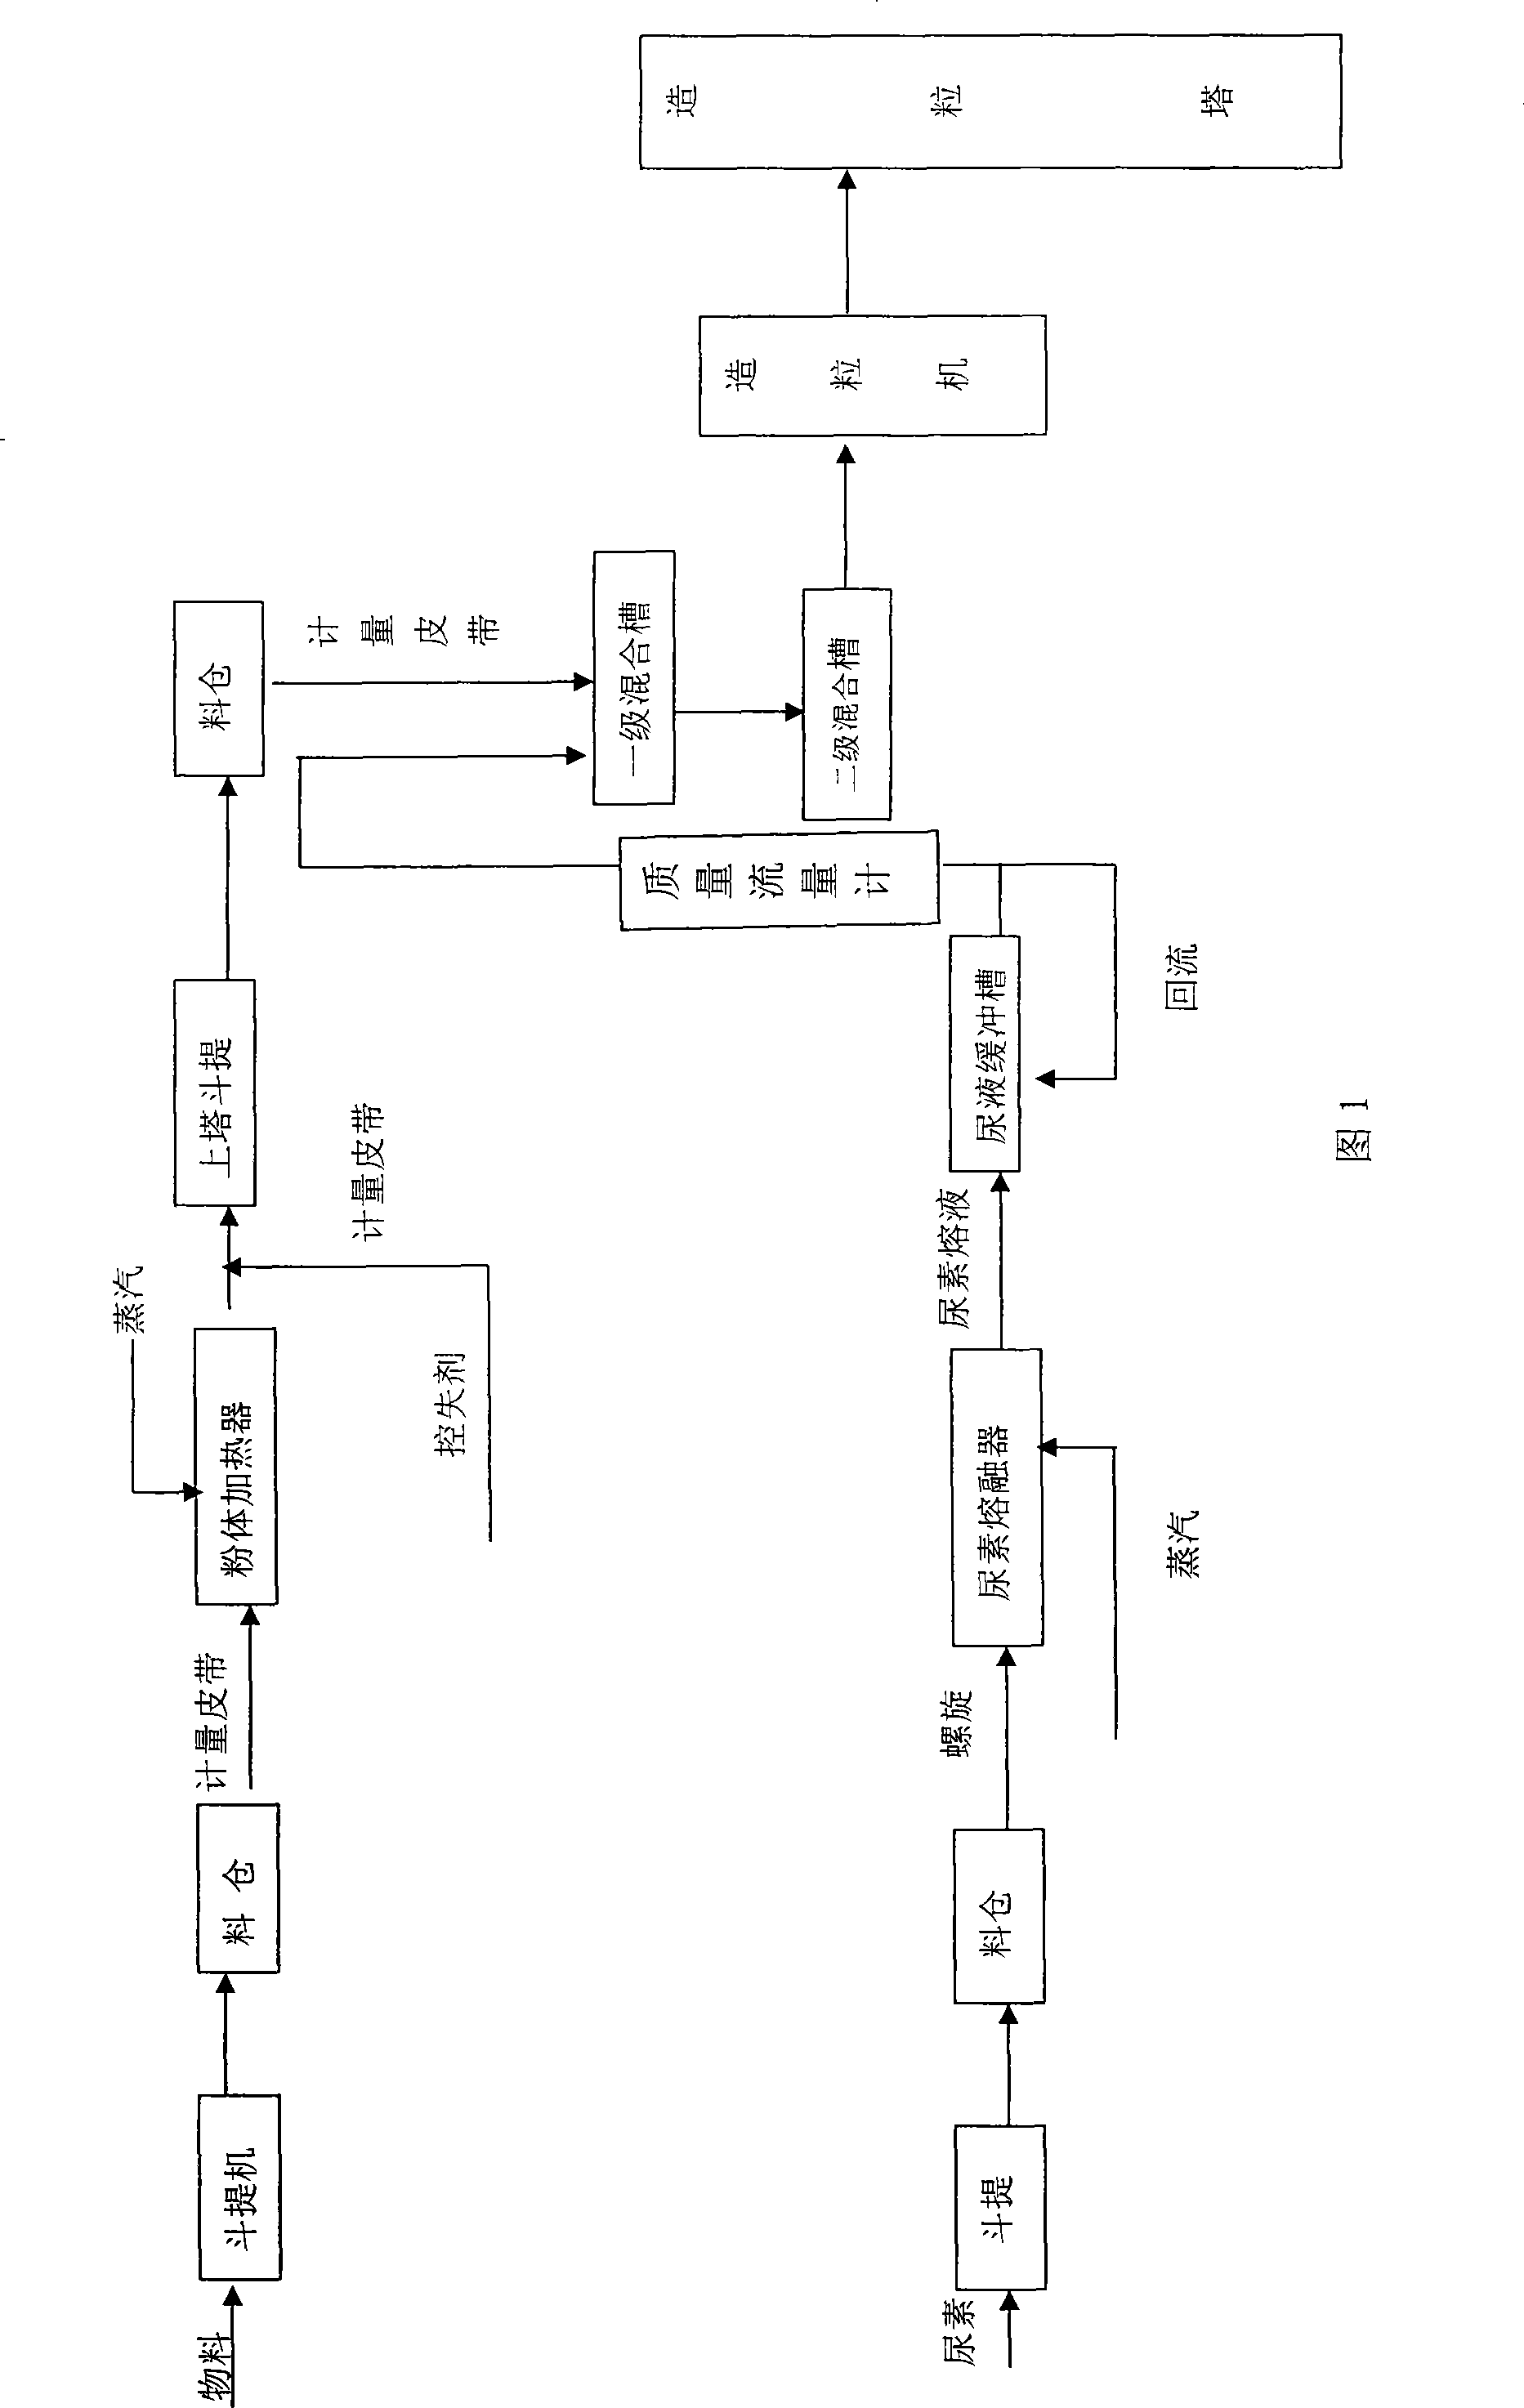 Method for preparing high tower control release compound fertilizer